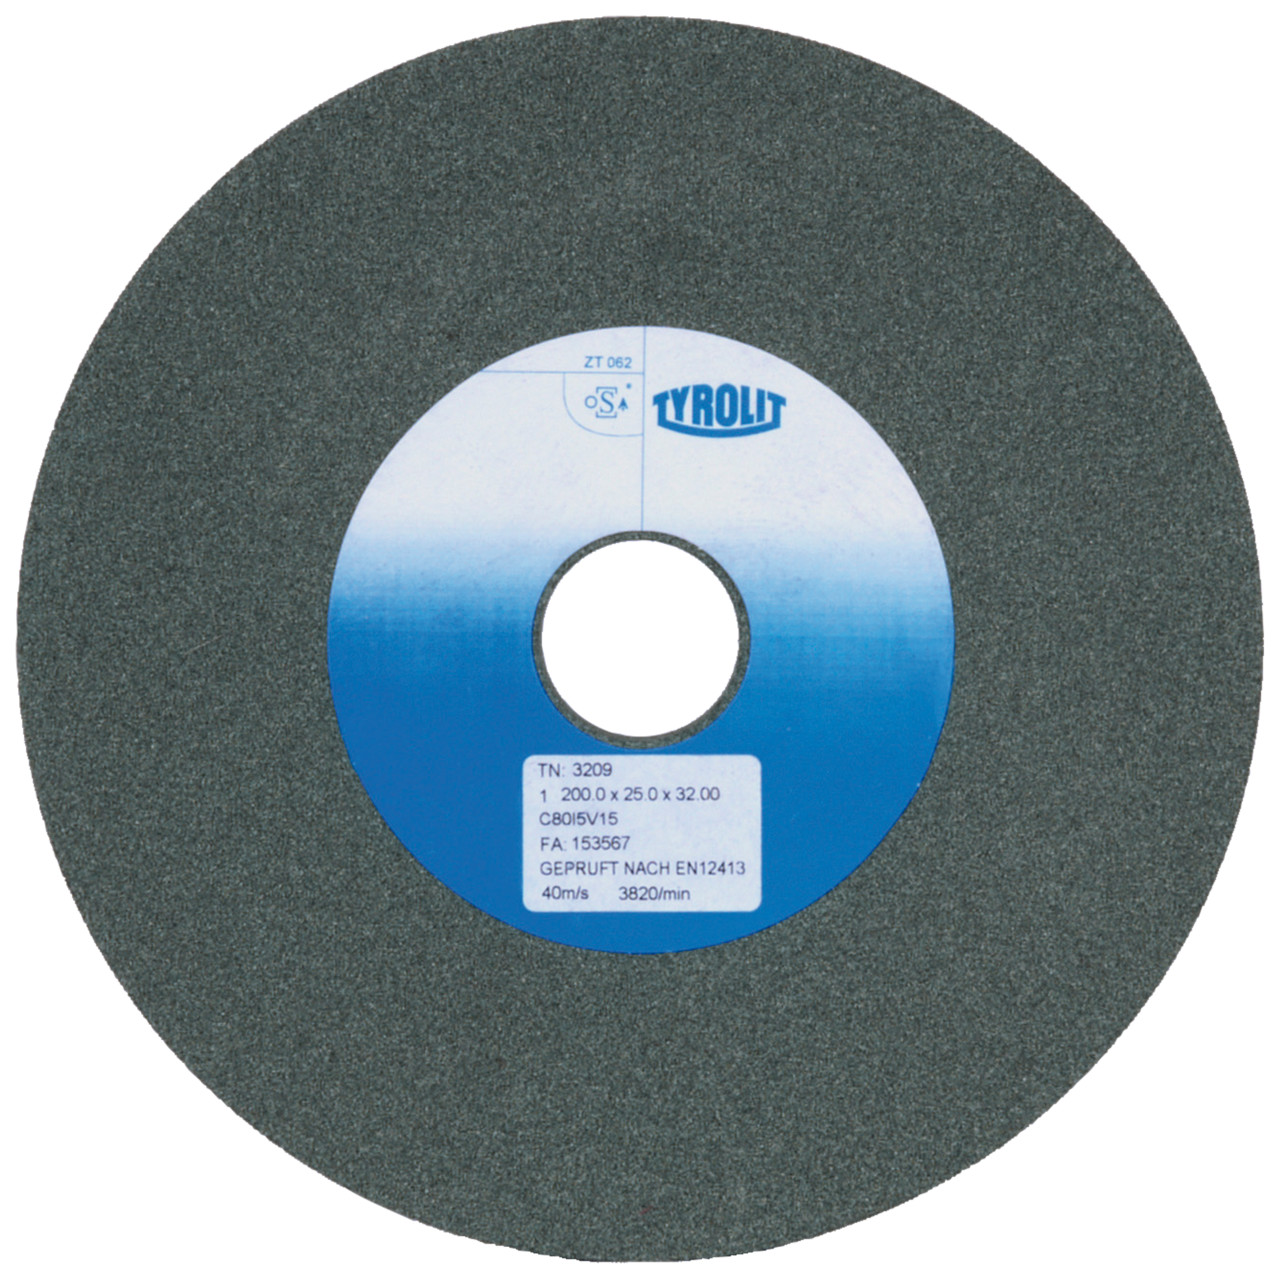 Tyrolit Conventional ceramic grinding discs DxDxH 200x20x51 For carbide and cast iron, shape: 1, Art. 872497